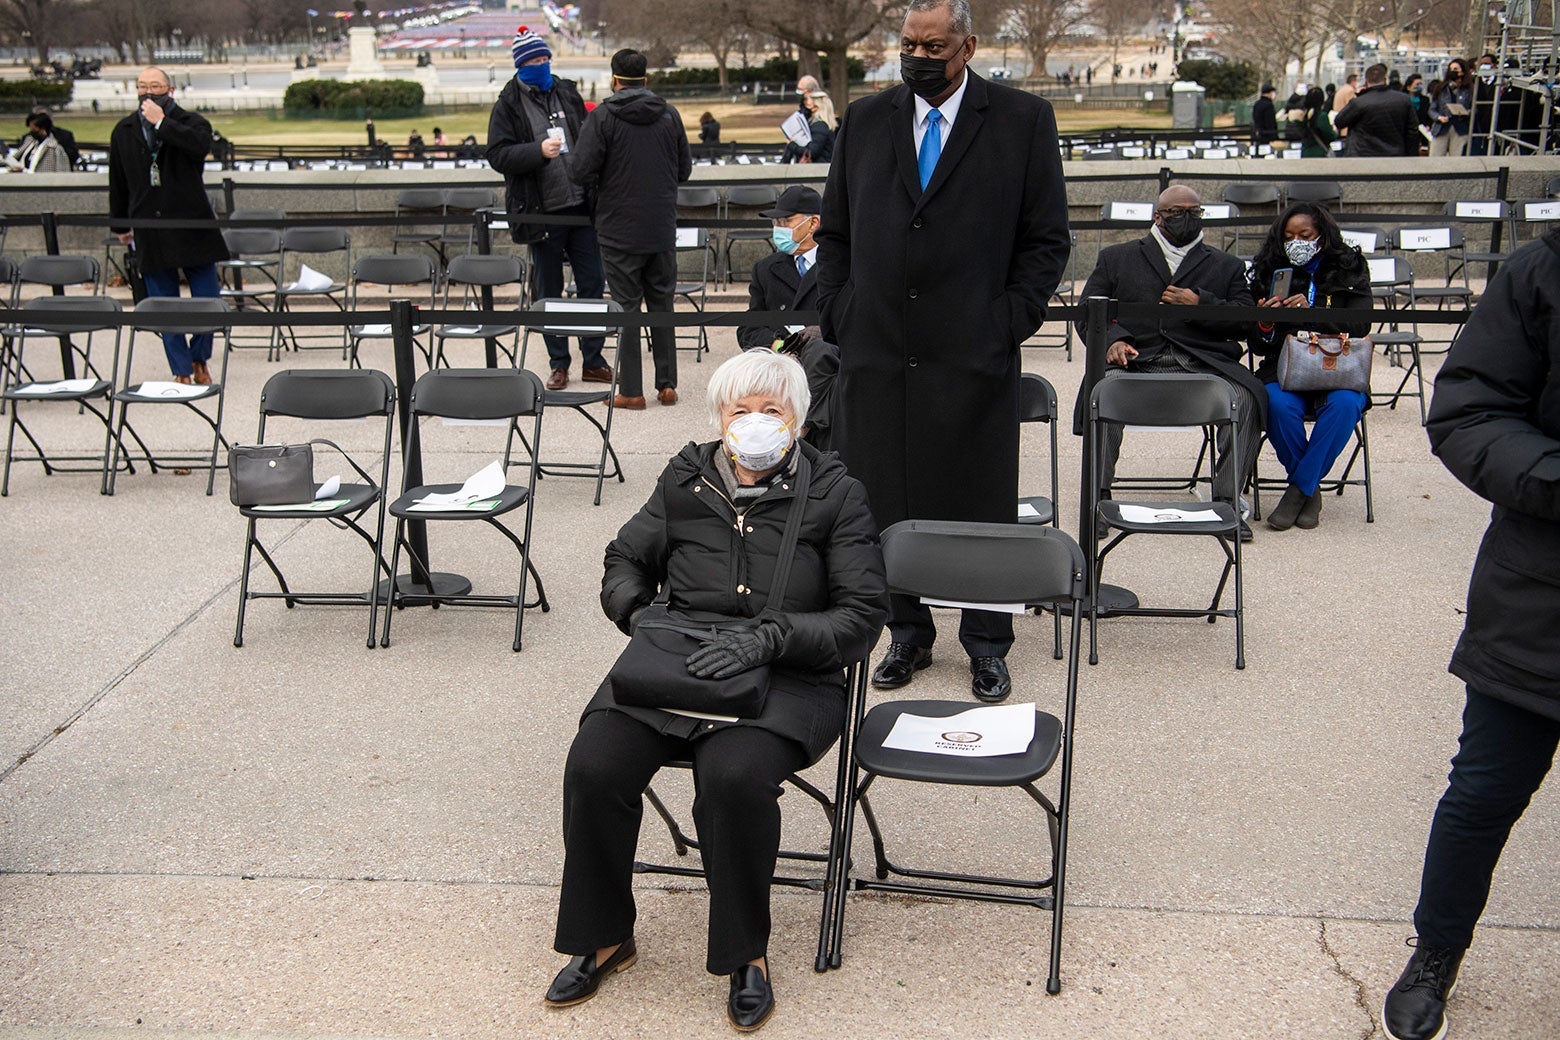 Janet Yellen sits in a folding chair in an all-black outfit with a white mask.